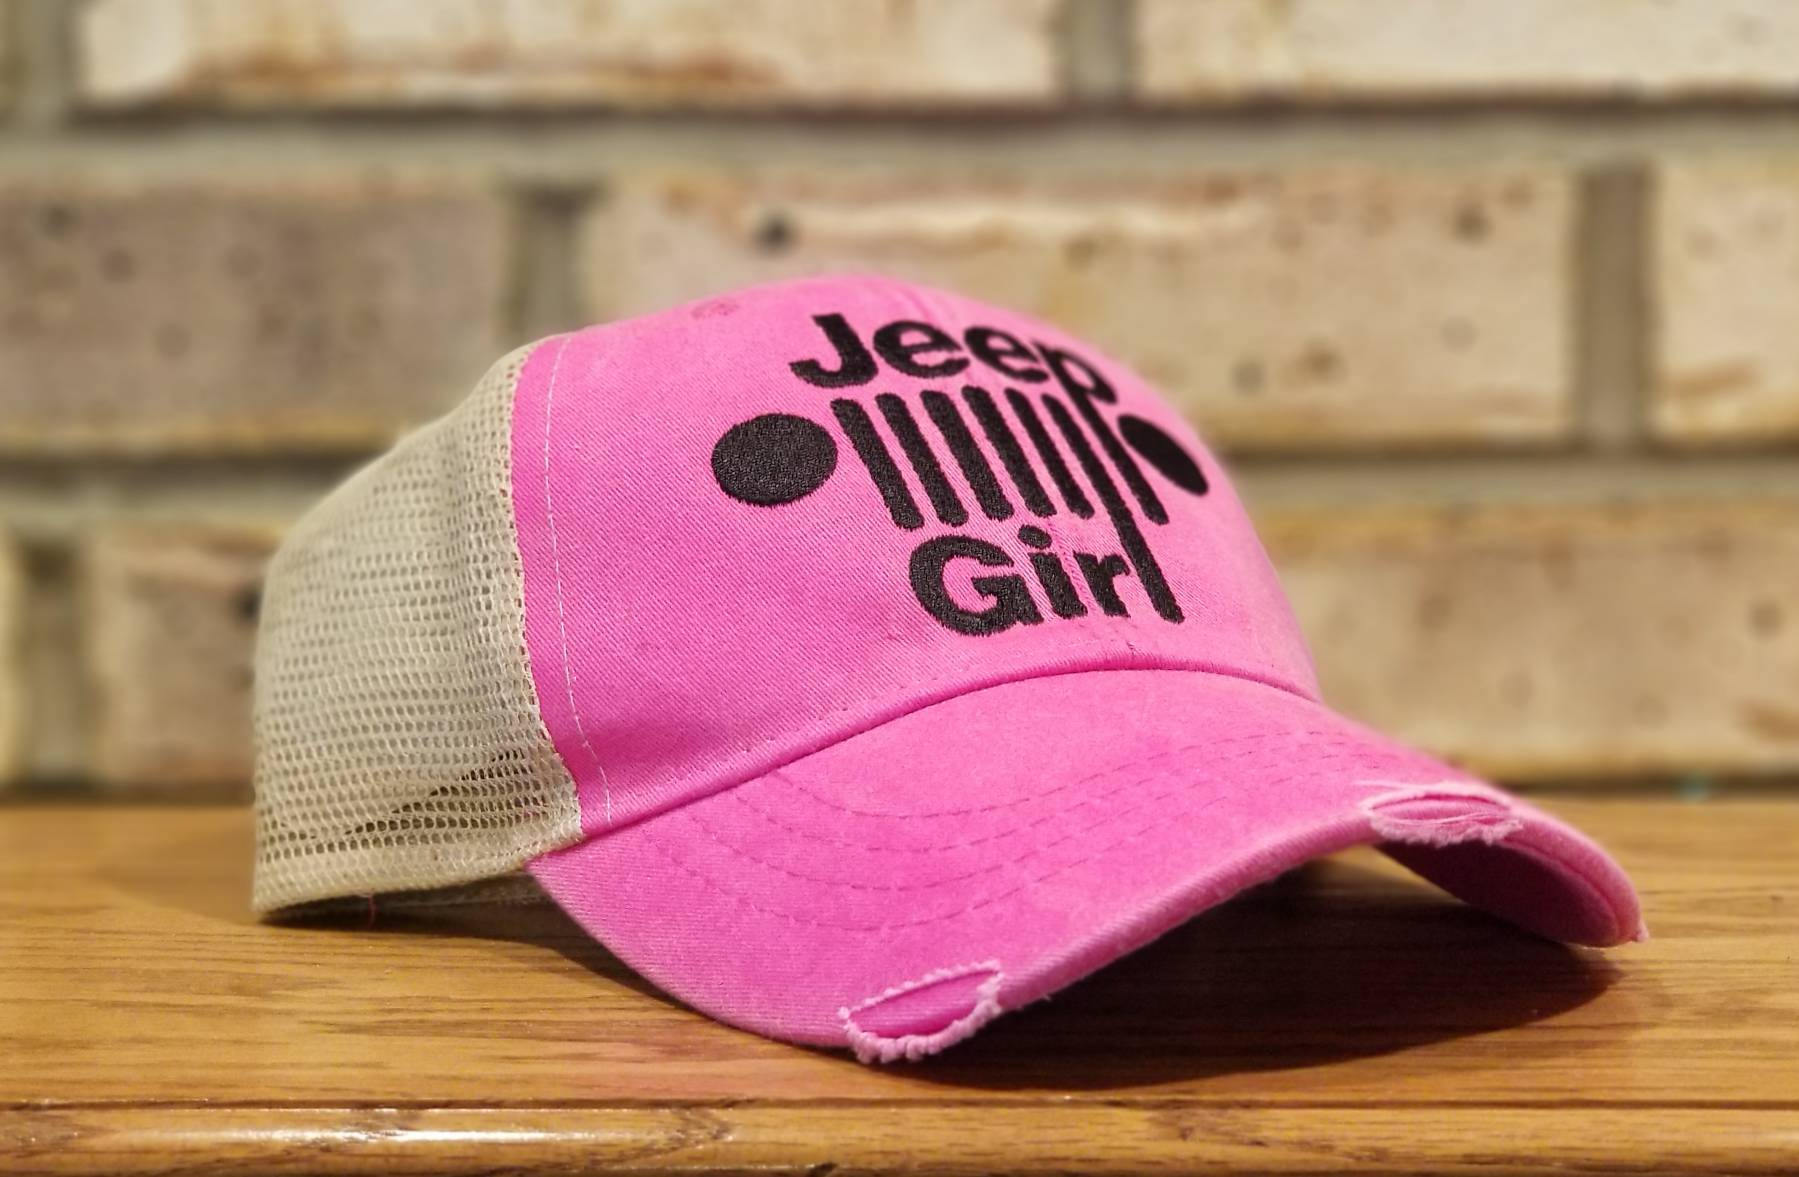 Jeep Girl Hat, Jeep Hair, Jeep Girl, It's A Jeep Thing You Wouldn't Understand, Jeep Trucker Hat, Can Be Personalized or Monogrammed